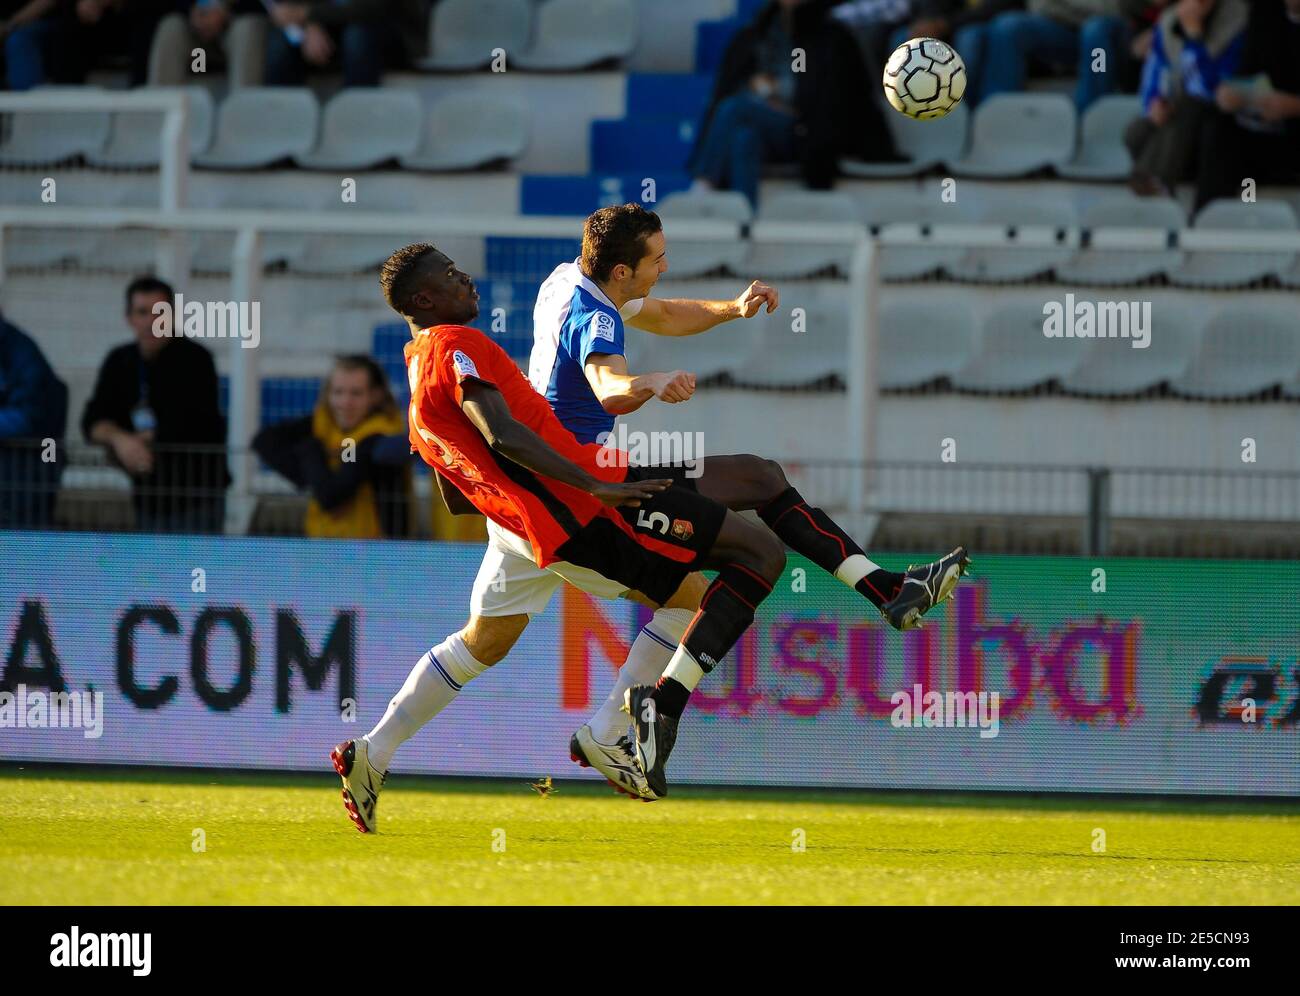 Rennes' Abdou Kader Mangane is challenged by Auxerre's Kevin Lejeune during  the French First League soccer match, Auxerre vs Rennes, in Auxerre,  France, on October 19, 2008. Auxerre and Rennes draw 0-0.